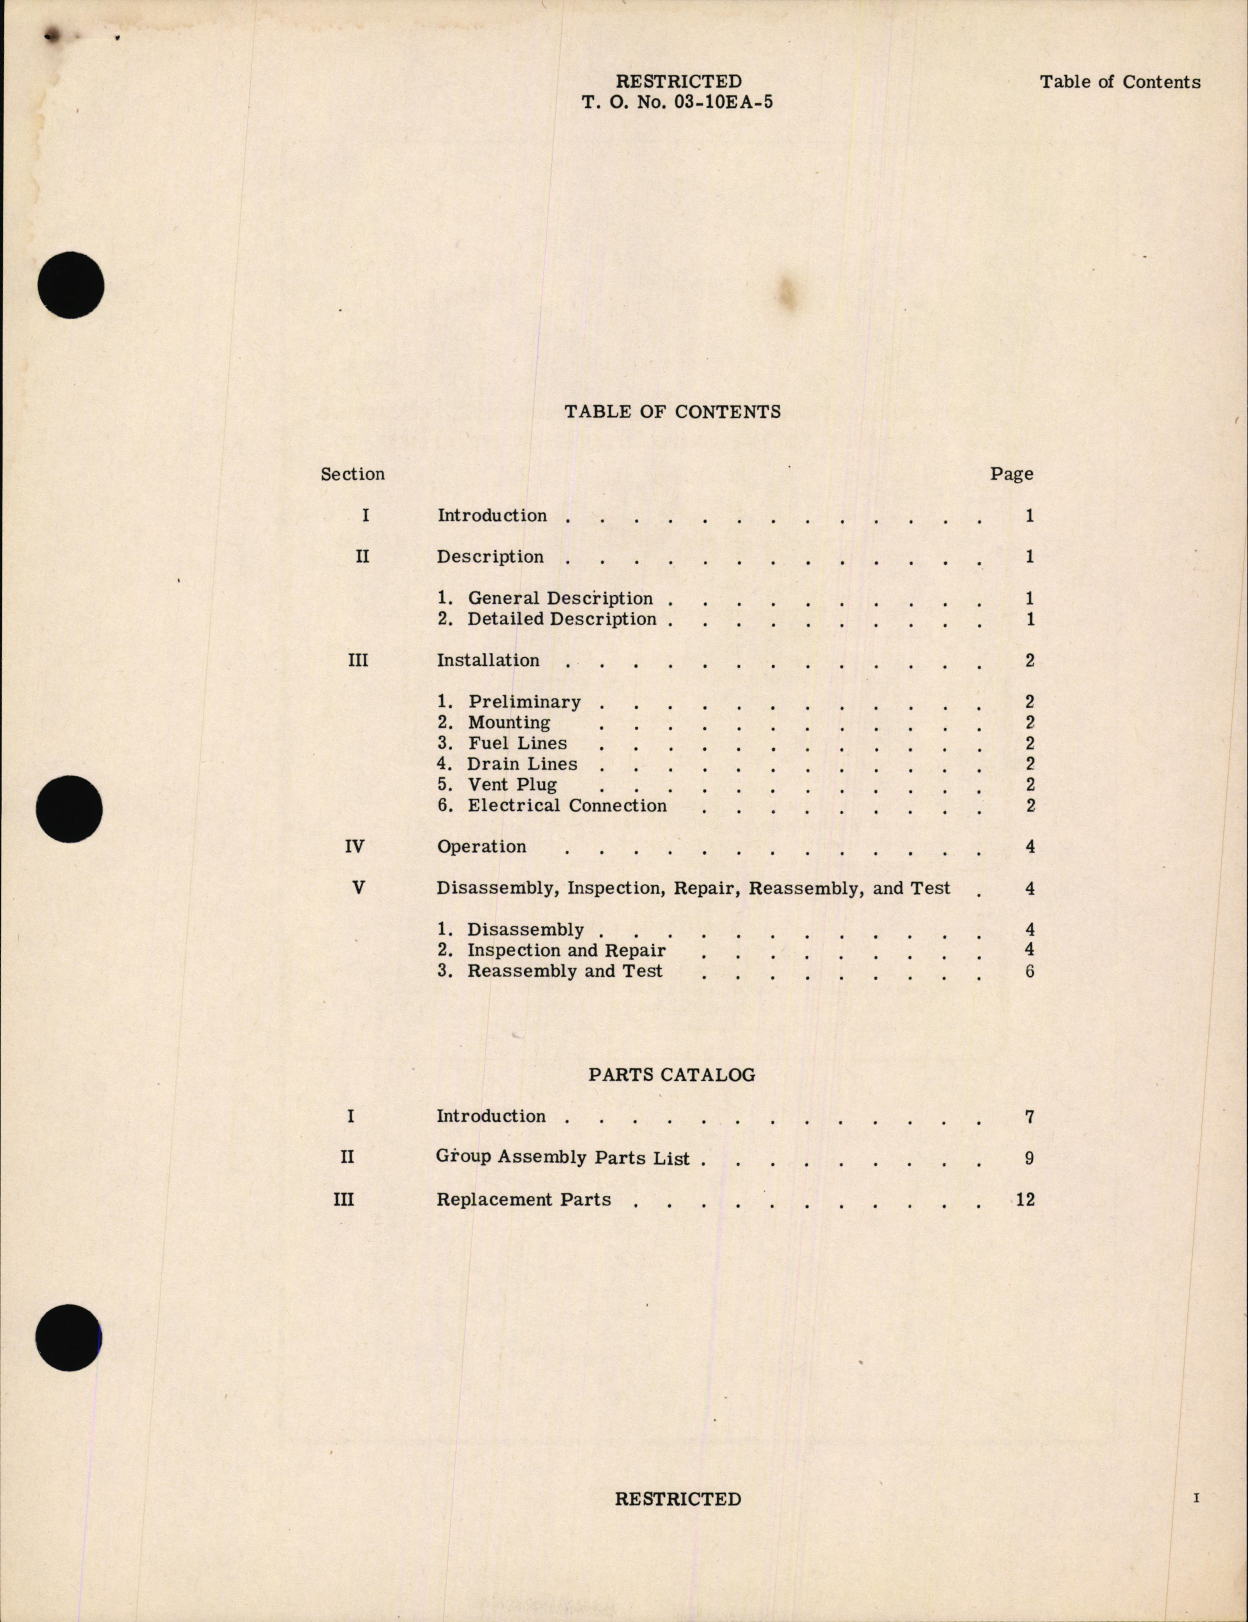 Sample page 5 from AirCorps Library document: Handbook of Instructions with Parts List for Centrifugal Fuel Pump Model 258 Series